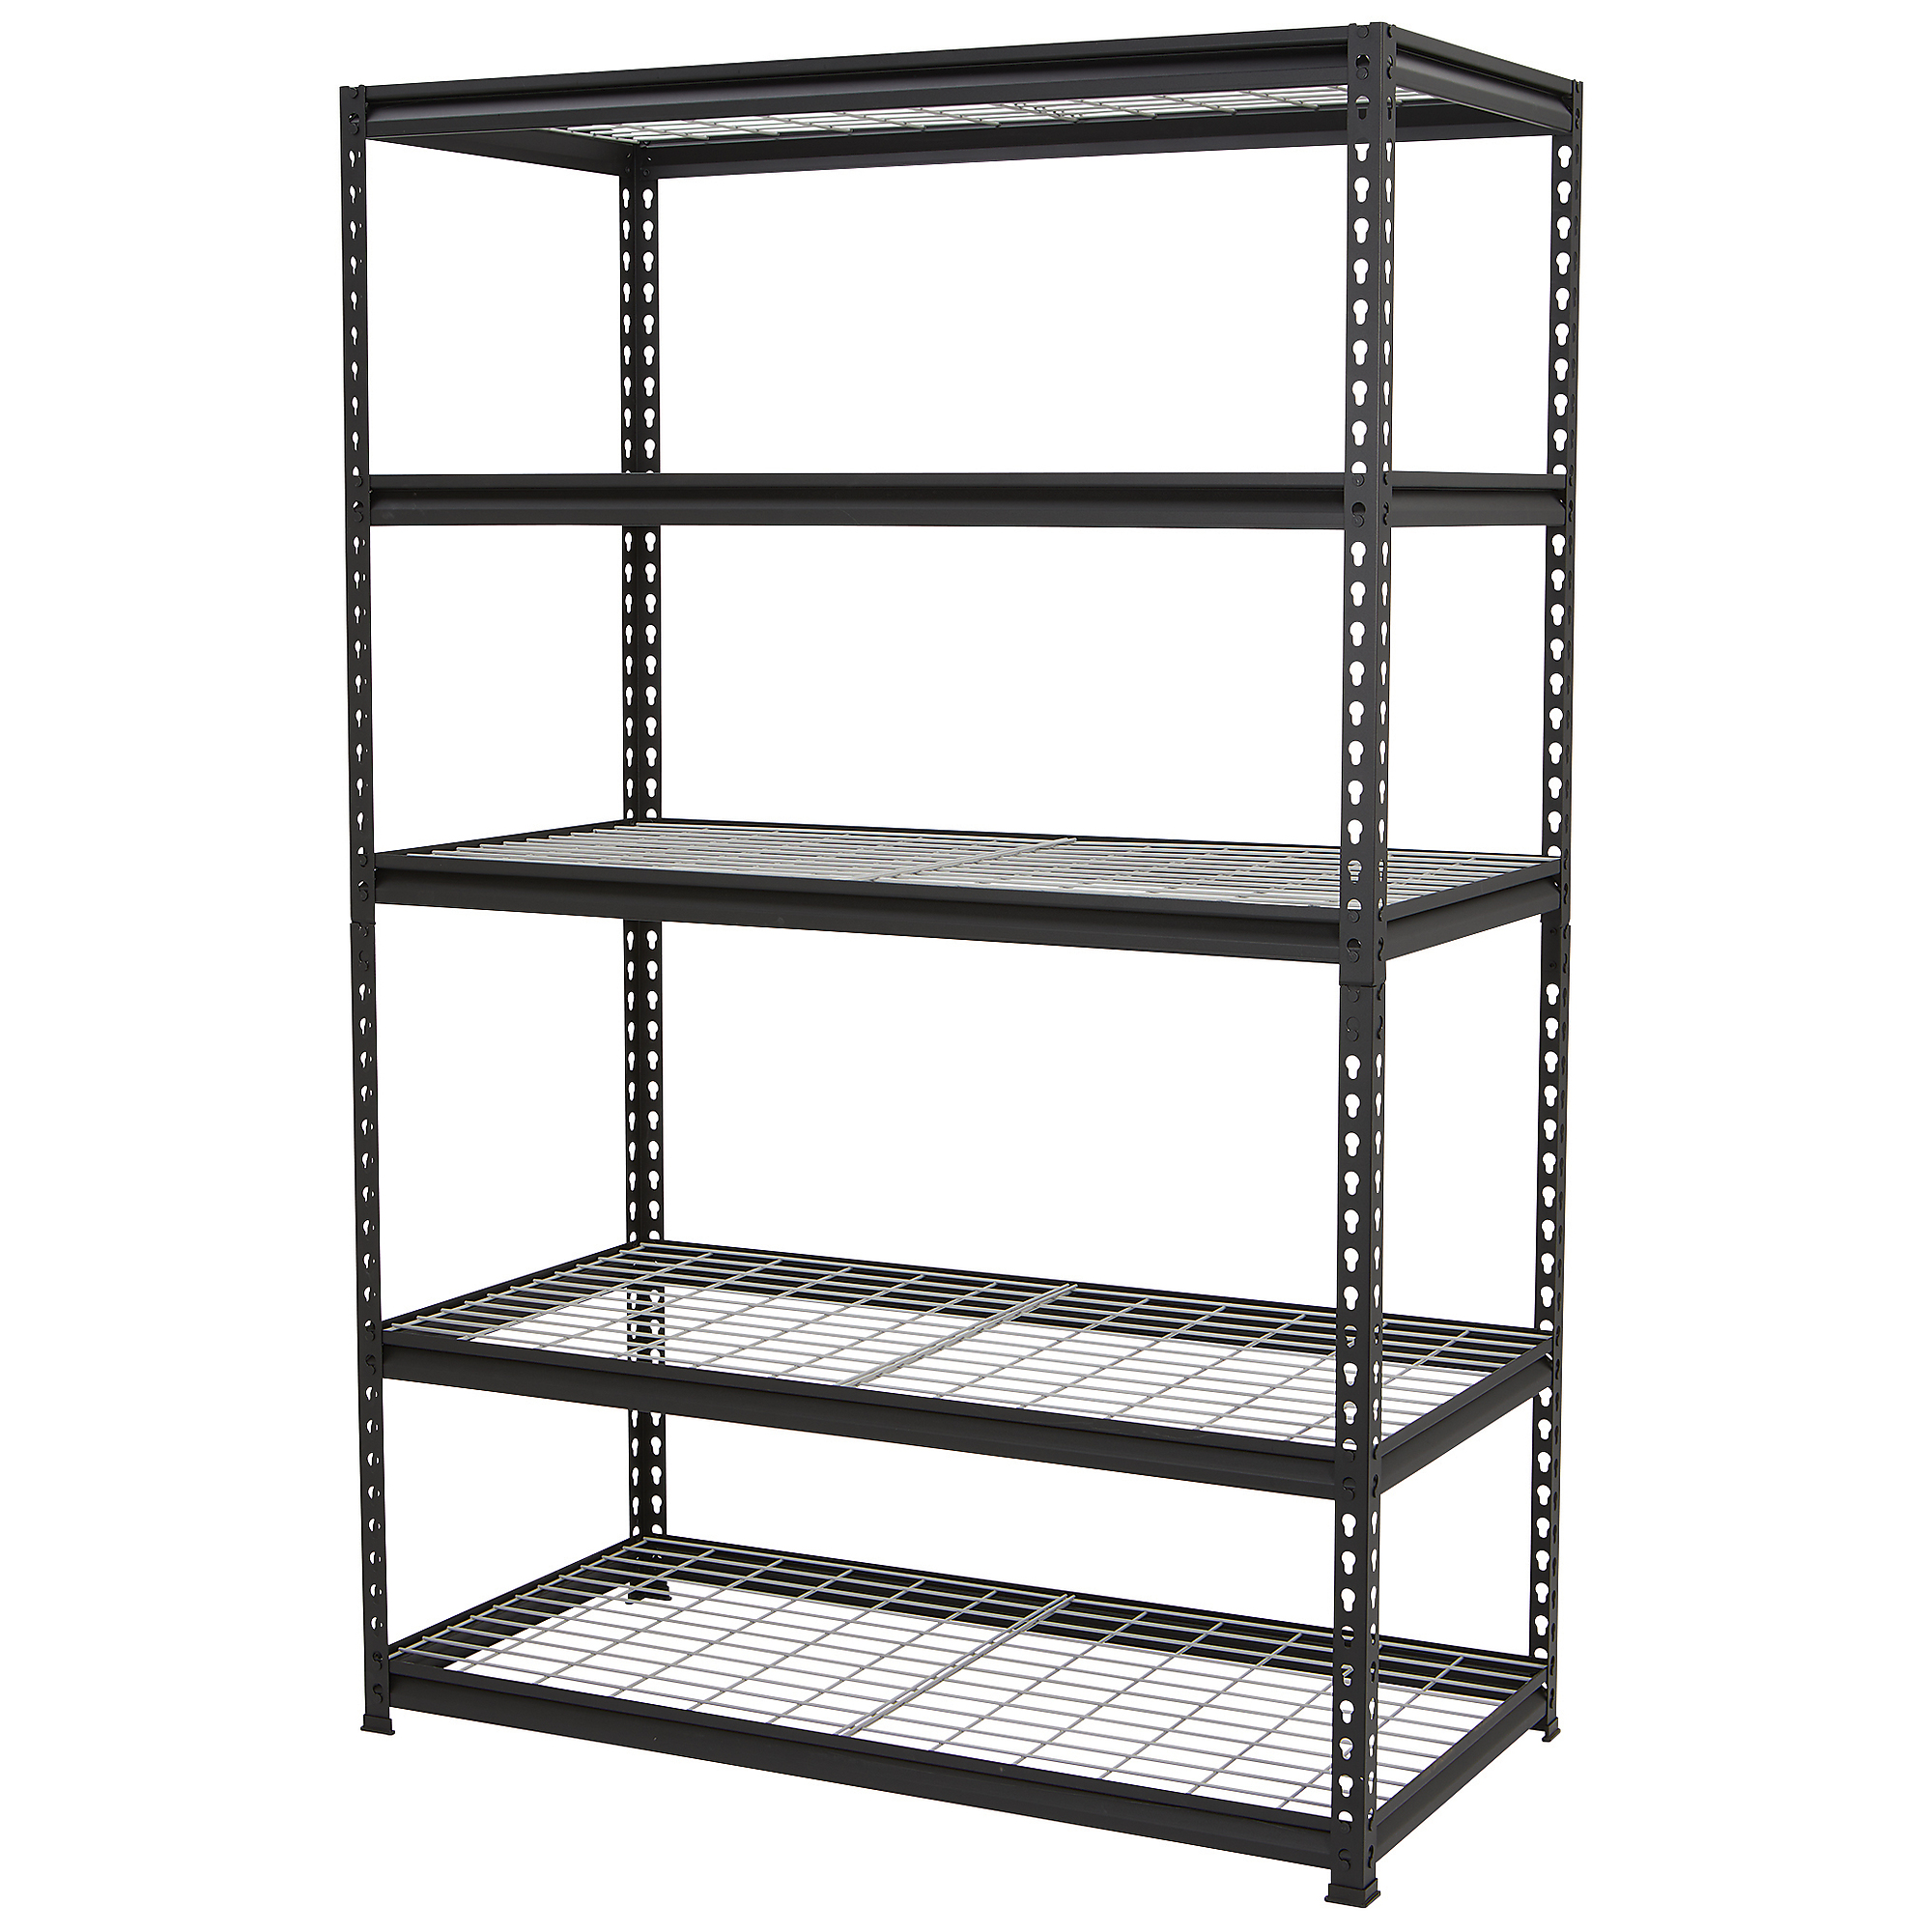 Strongway Heavy-Duty Wire Shelving Unit, 5 Shelves, 4000-Lb. Capacity, 48Inch L x 24Inch D x 72Inch H